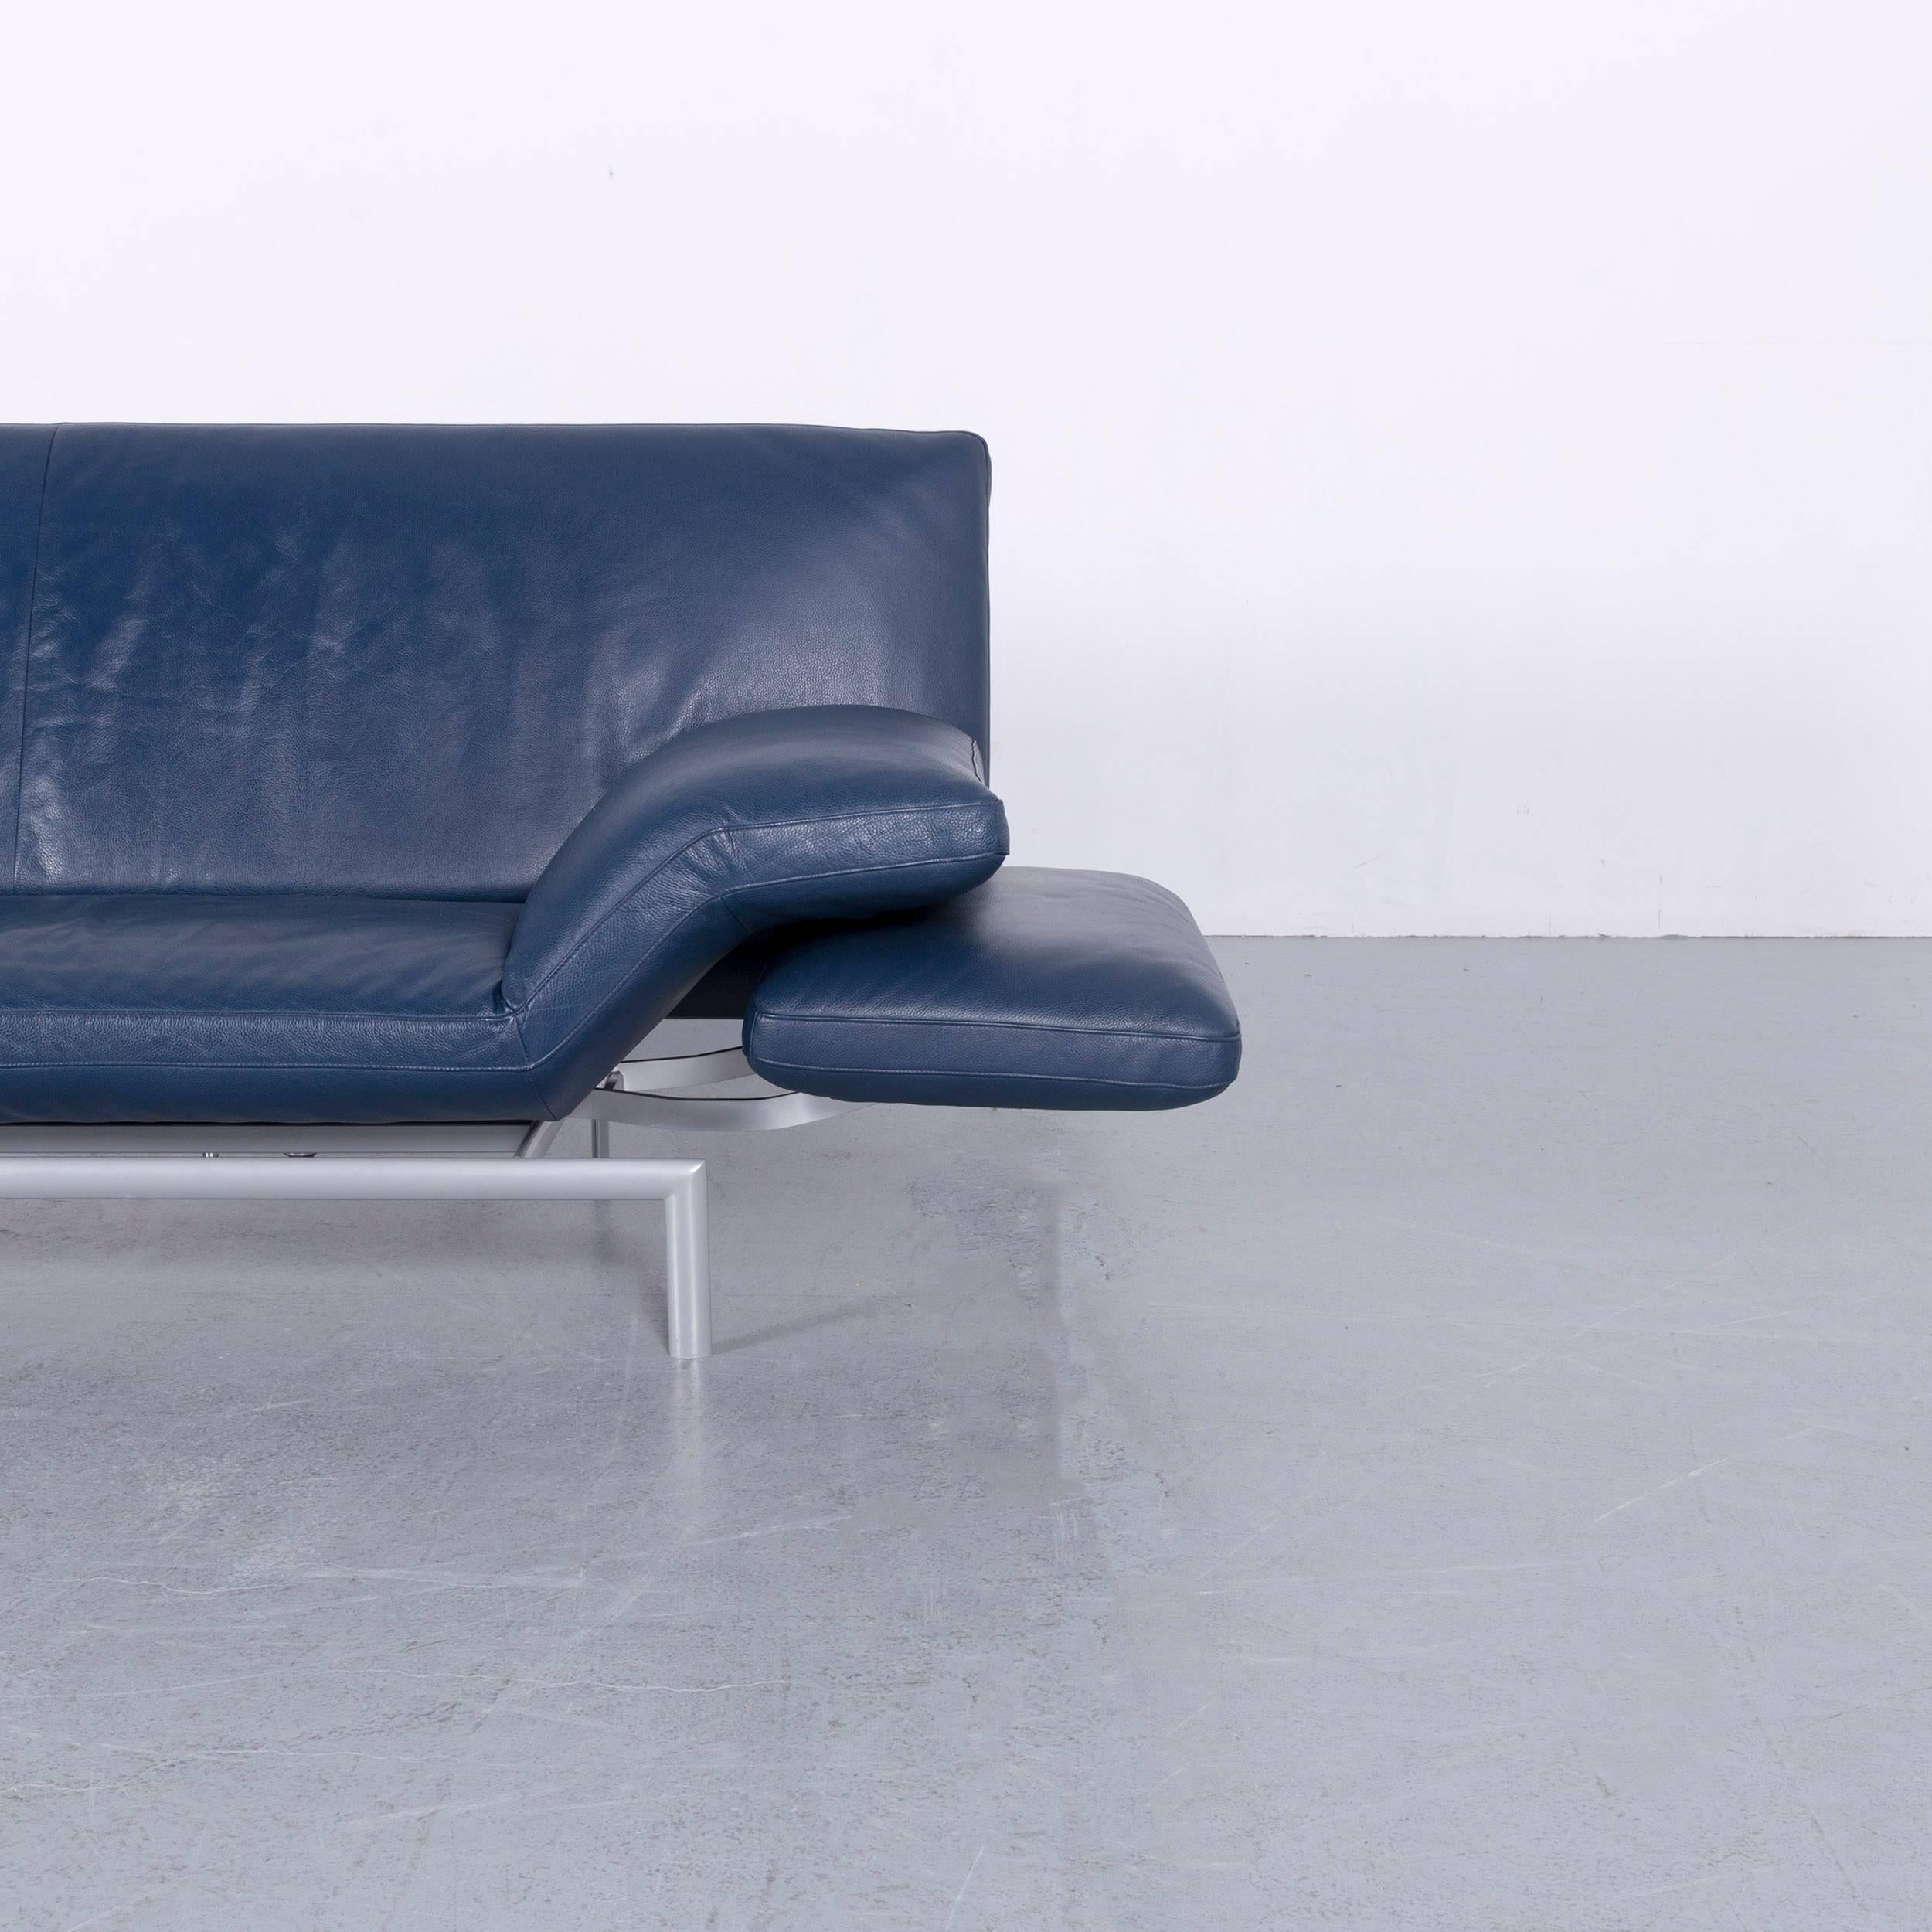 German Design Flyer Leather Sofa Blue Two-Seat